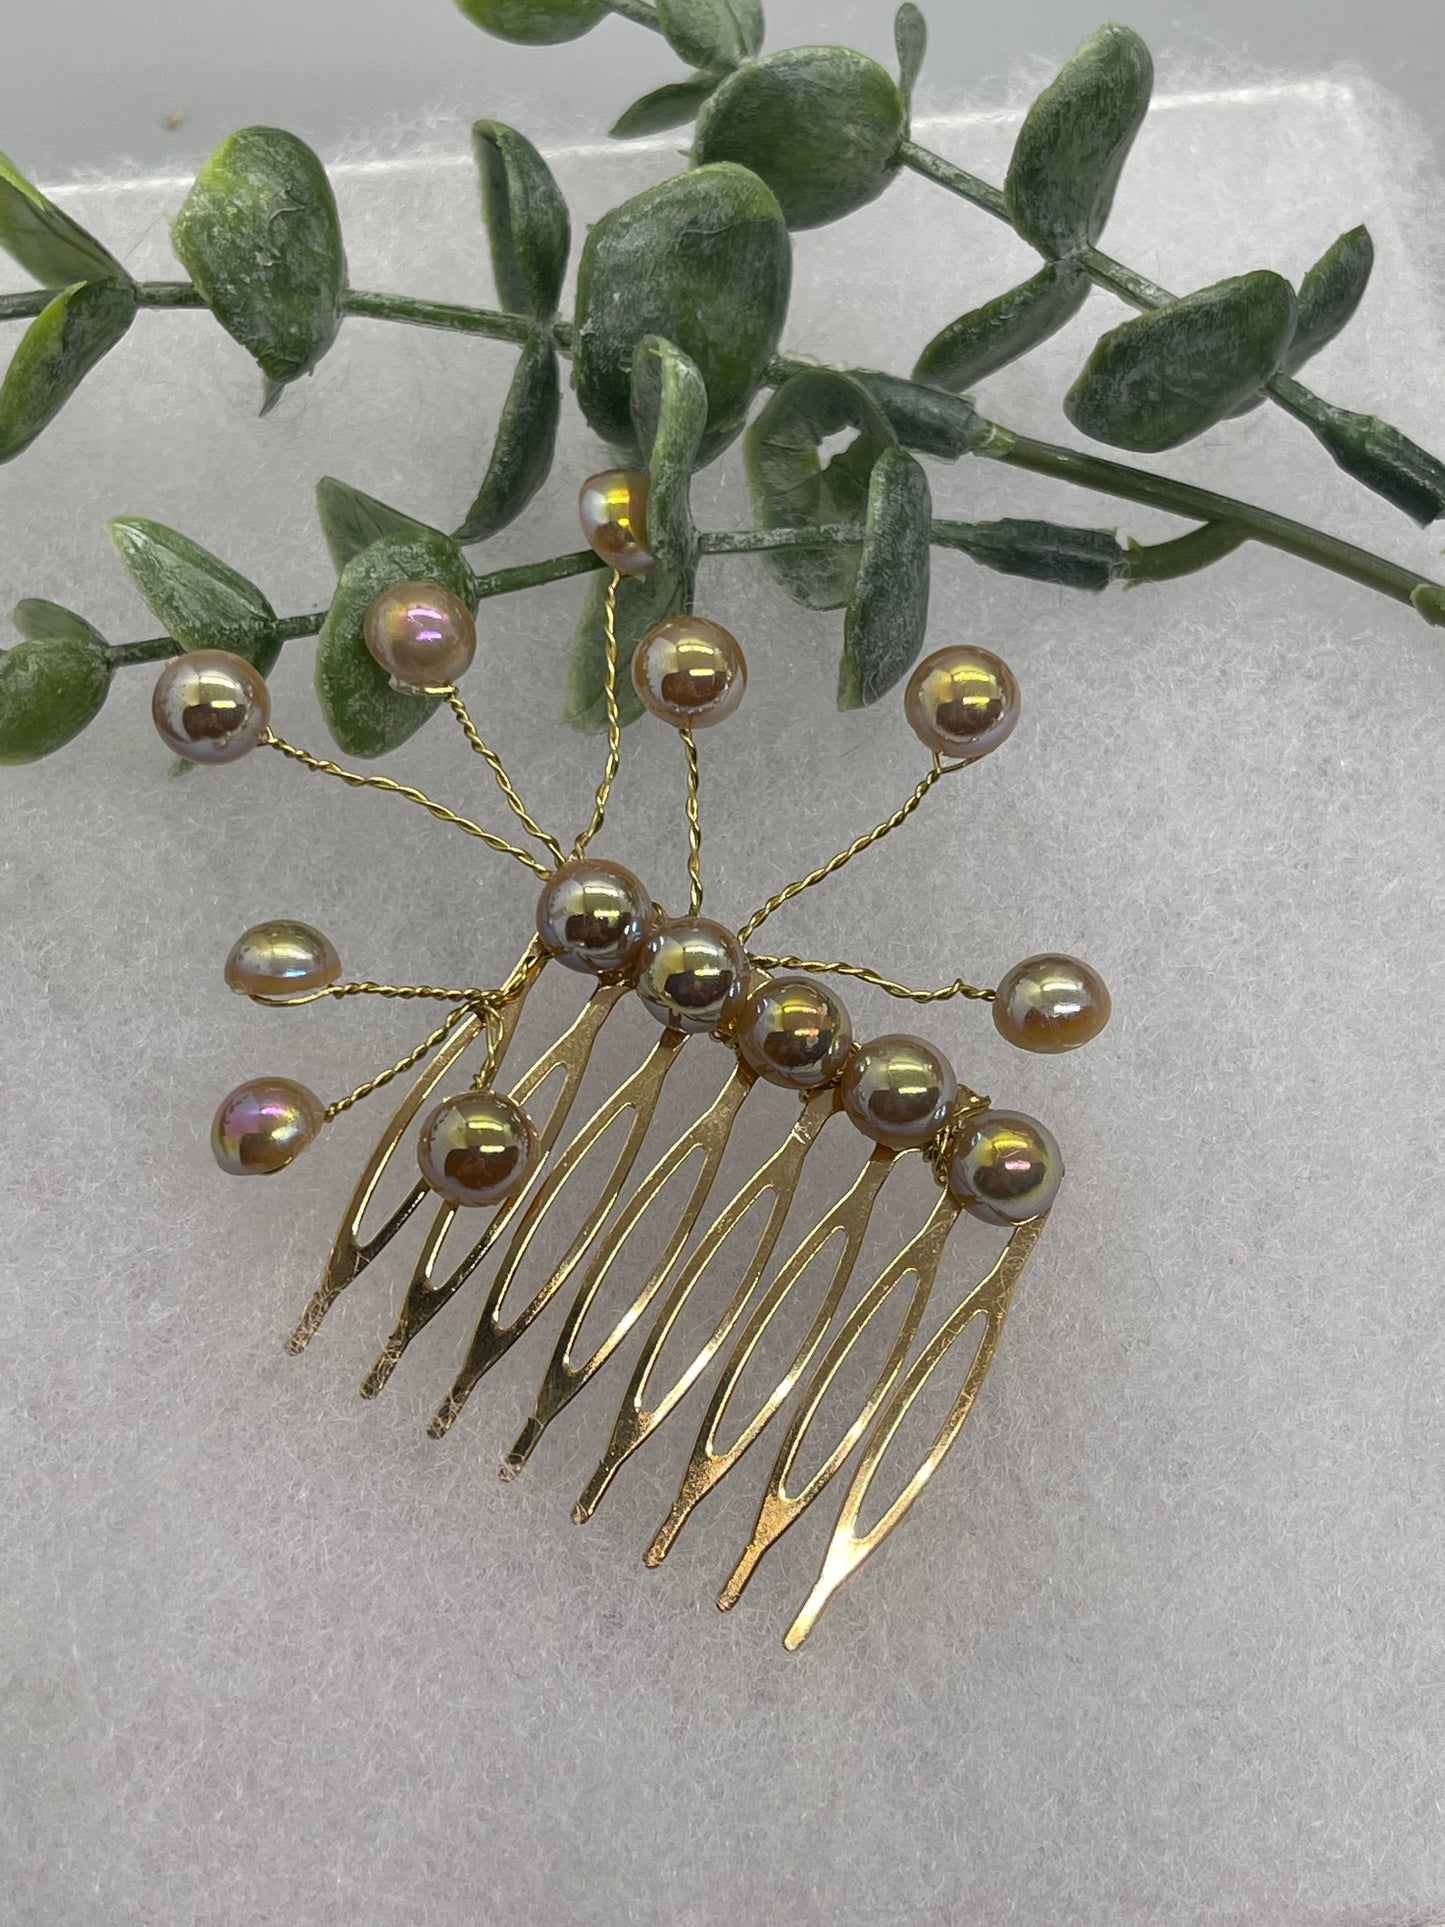 Gold iridescent faux pearl 2.0” gold tone bridal side Comb accents vine handmade by hairdazzzel wedding accessory bride princess